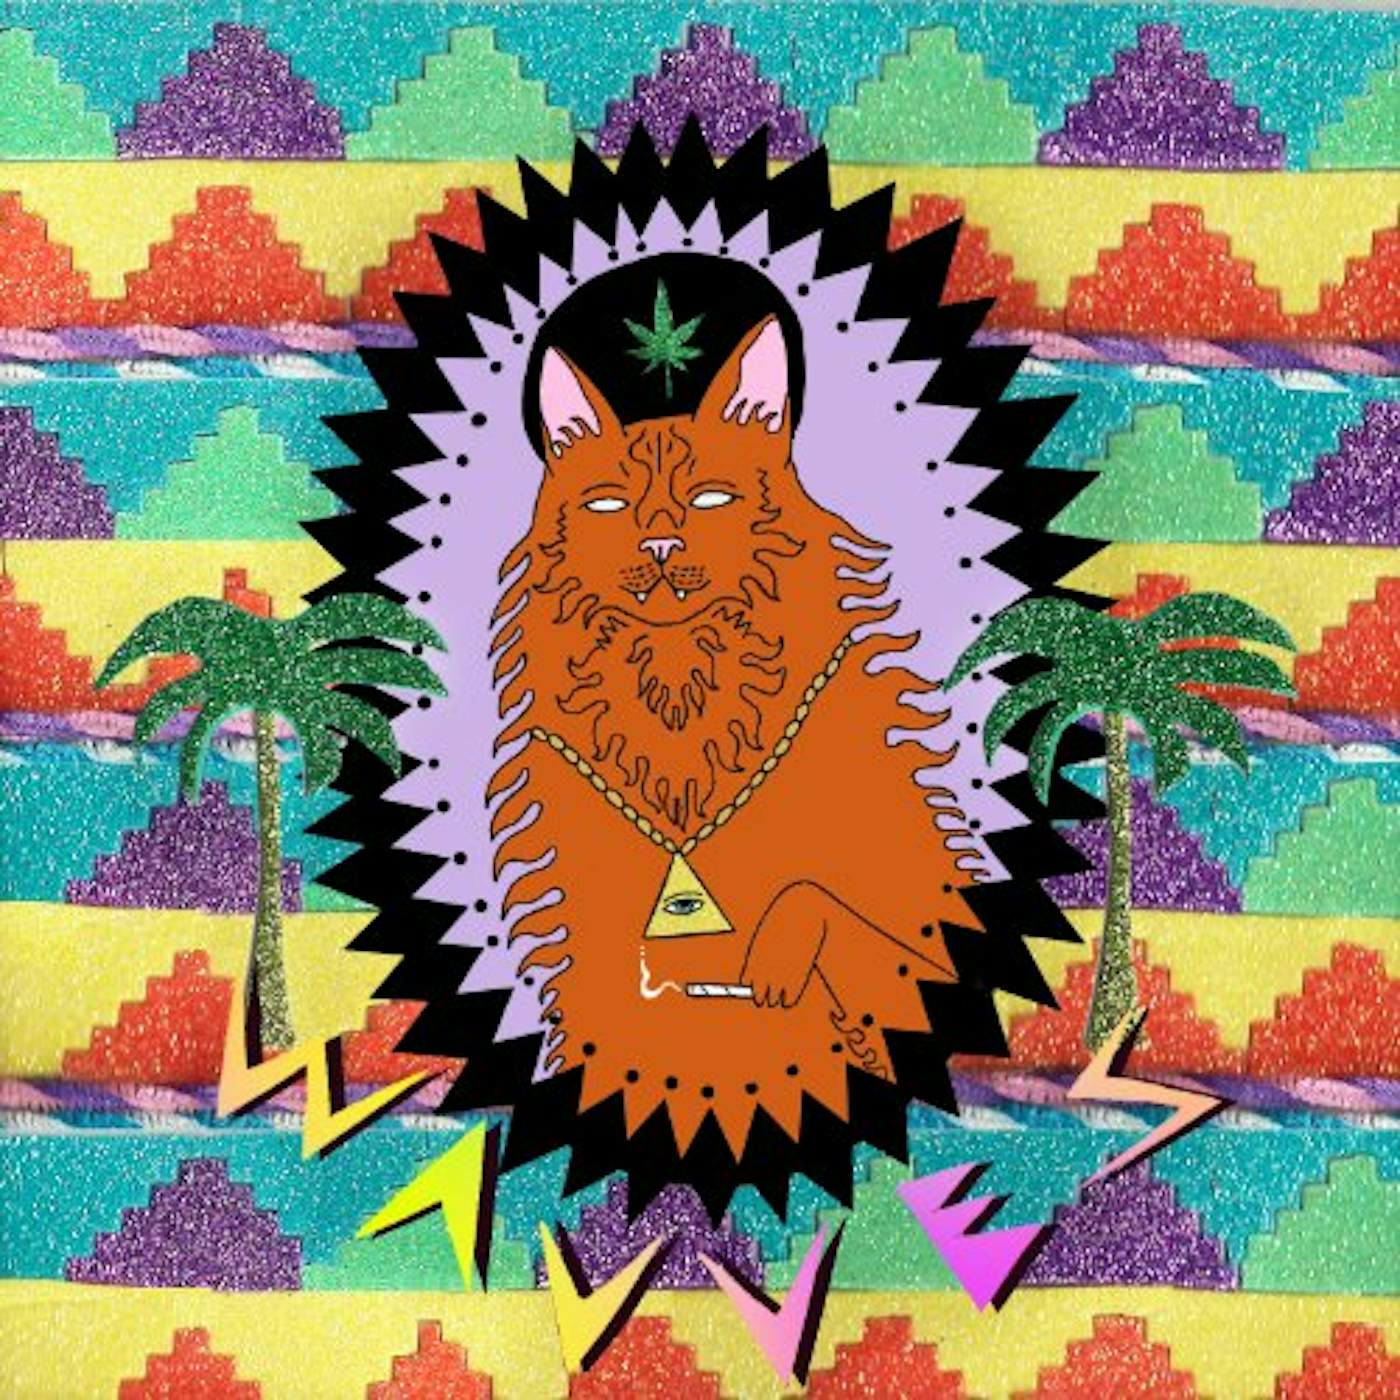 Wavves KING OF THE BEACH CD